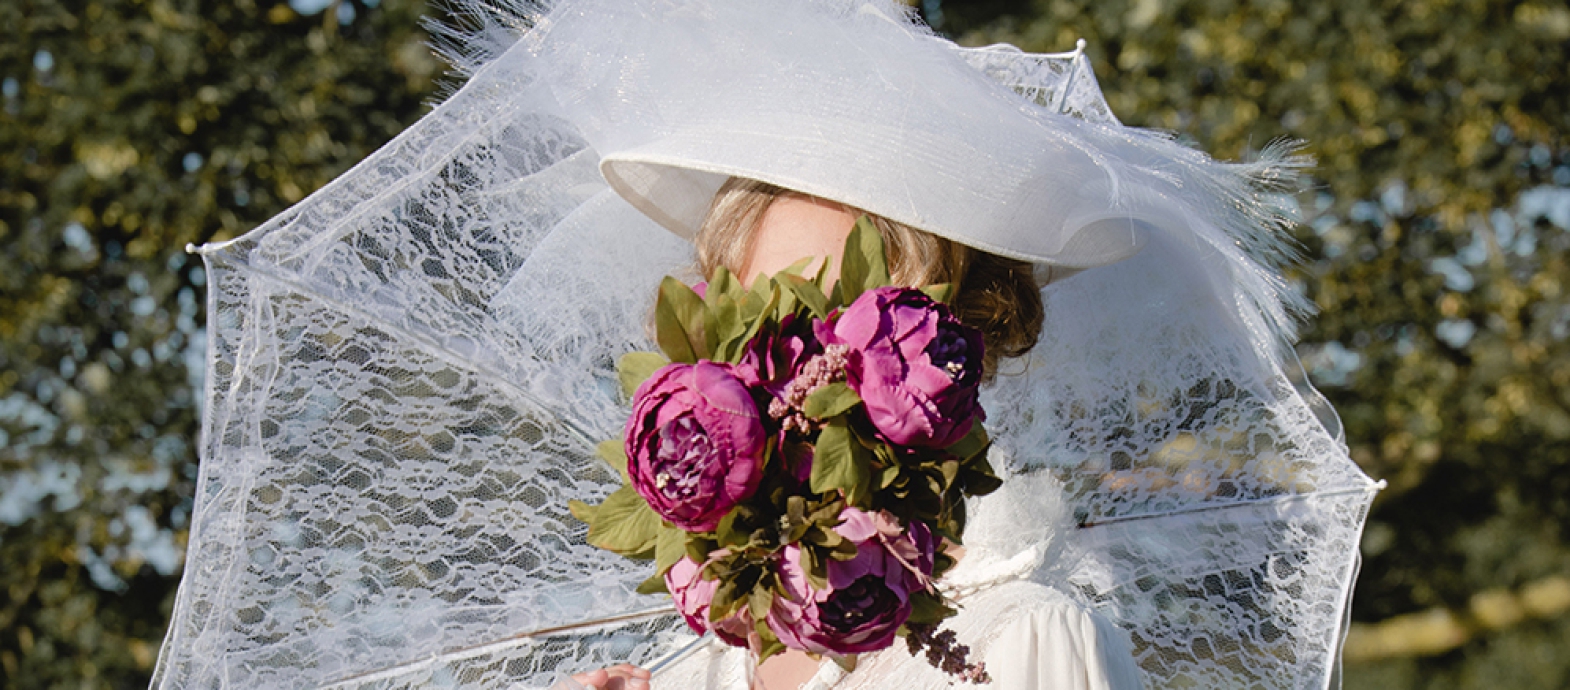 the wedding season has started: find your perfect hat or fascinator match at the MV hat stores